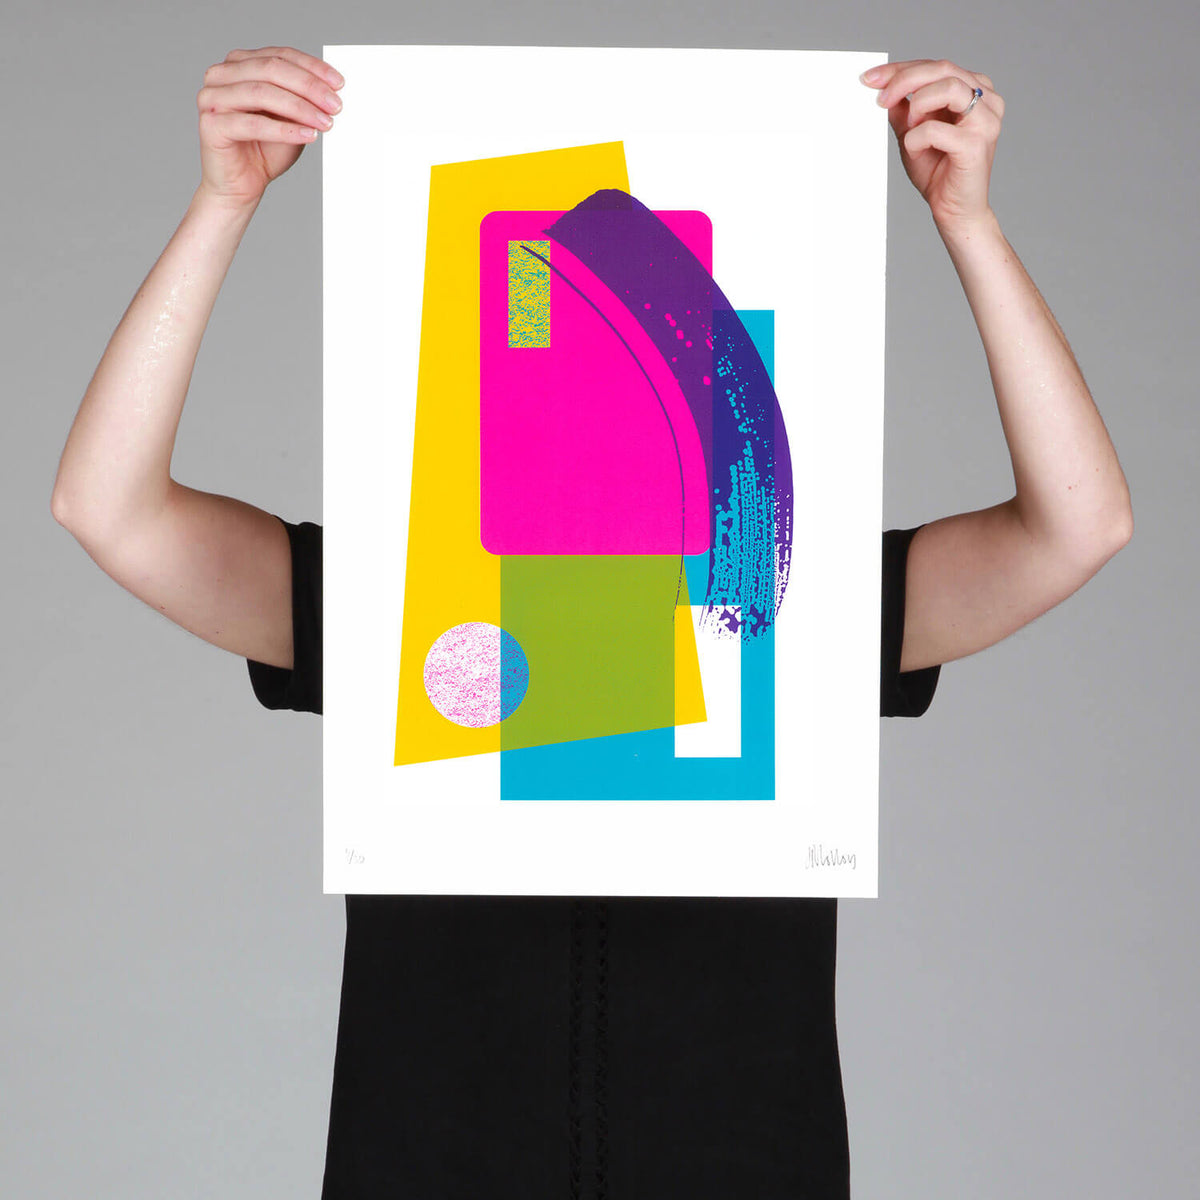 Abstract pop art screenprint in yellow, pink & blue, with purple brushstroke effect, in a limited edition by Josie Blue Molloy